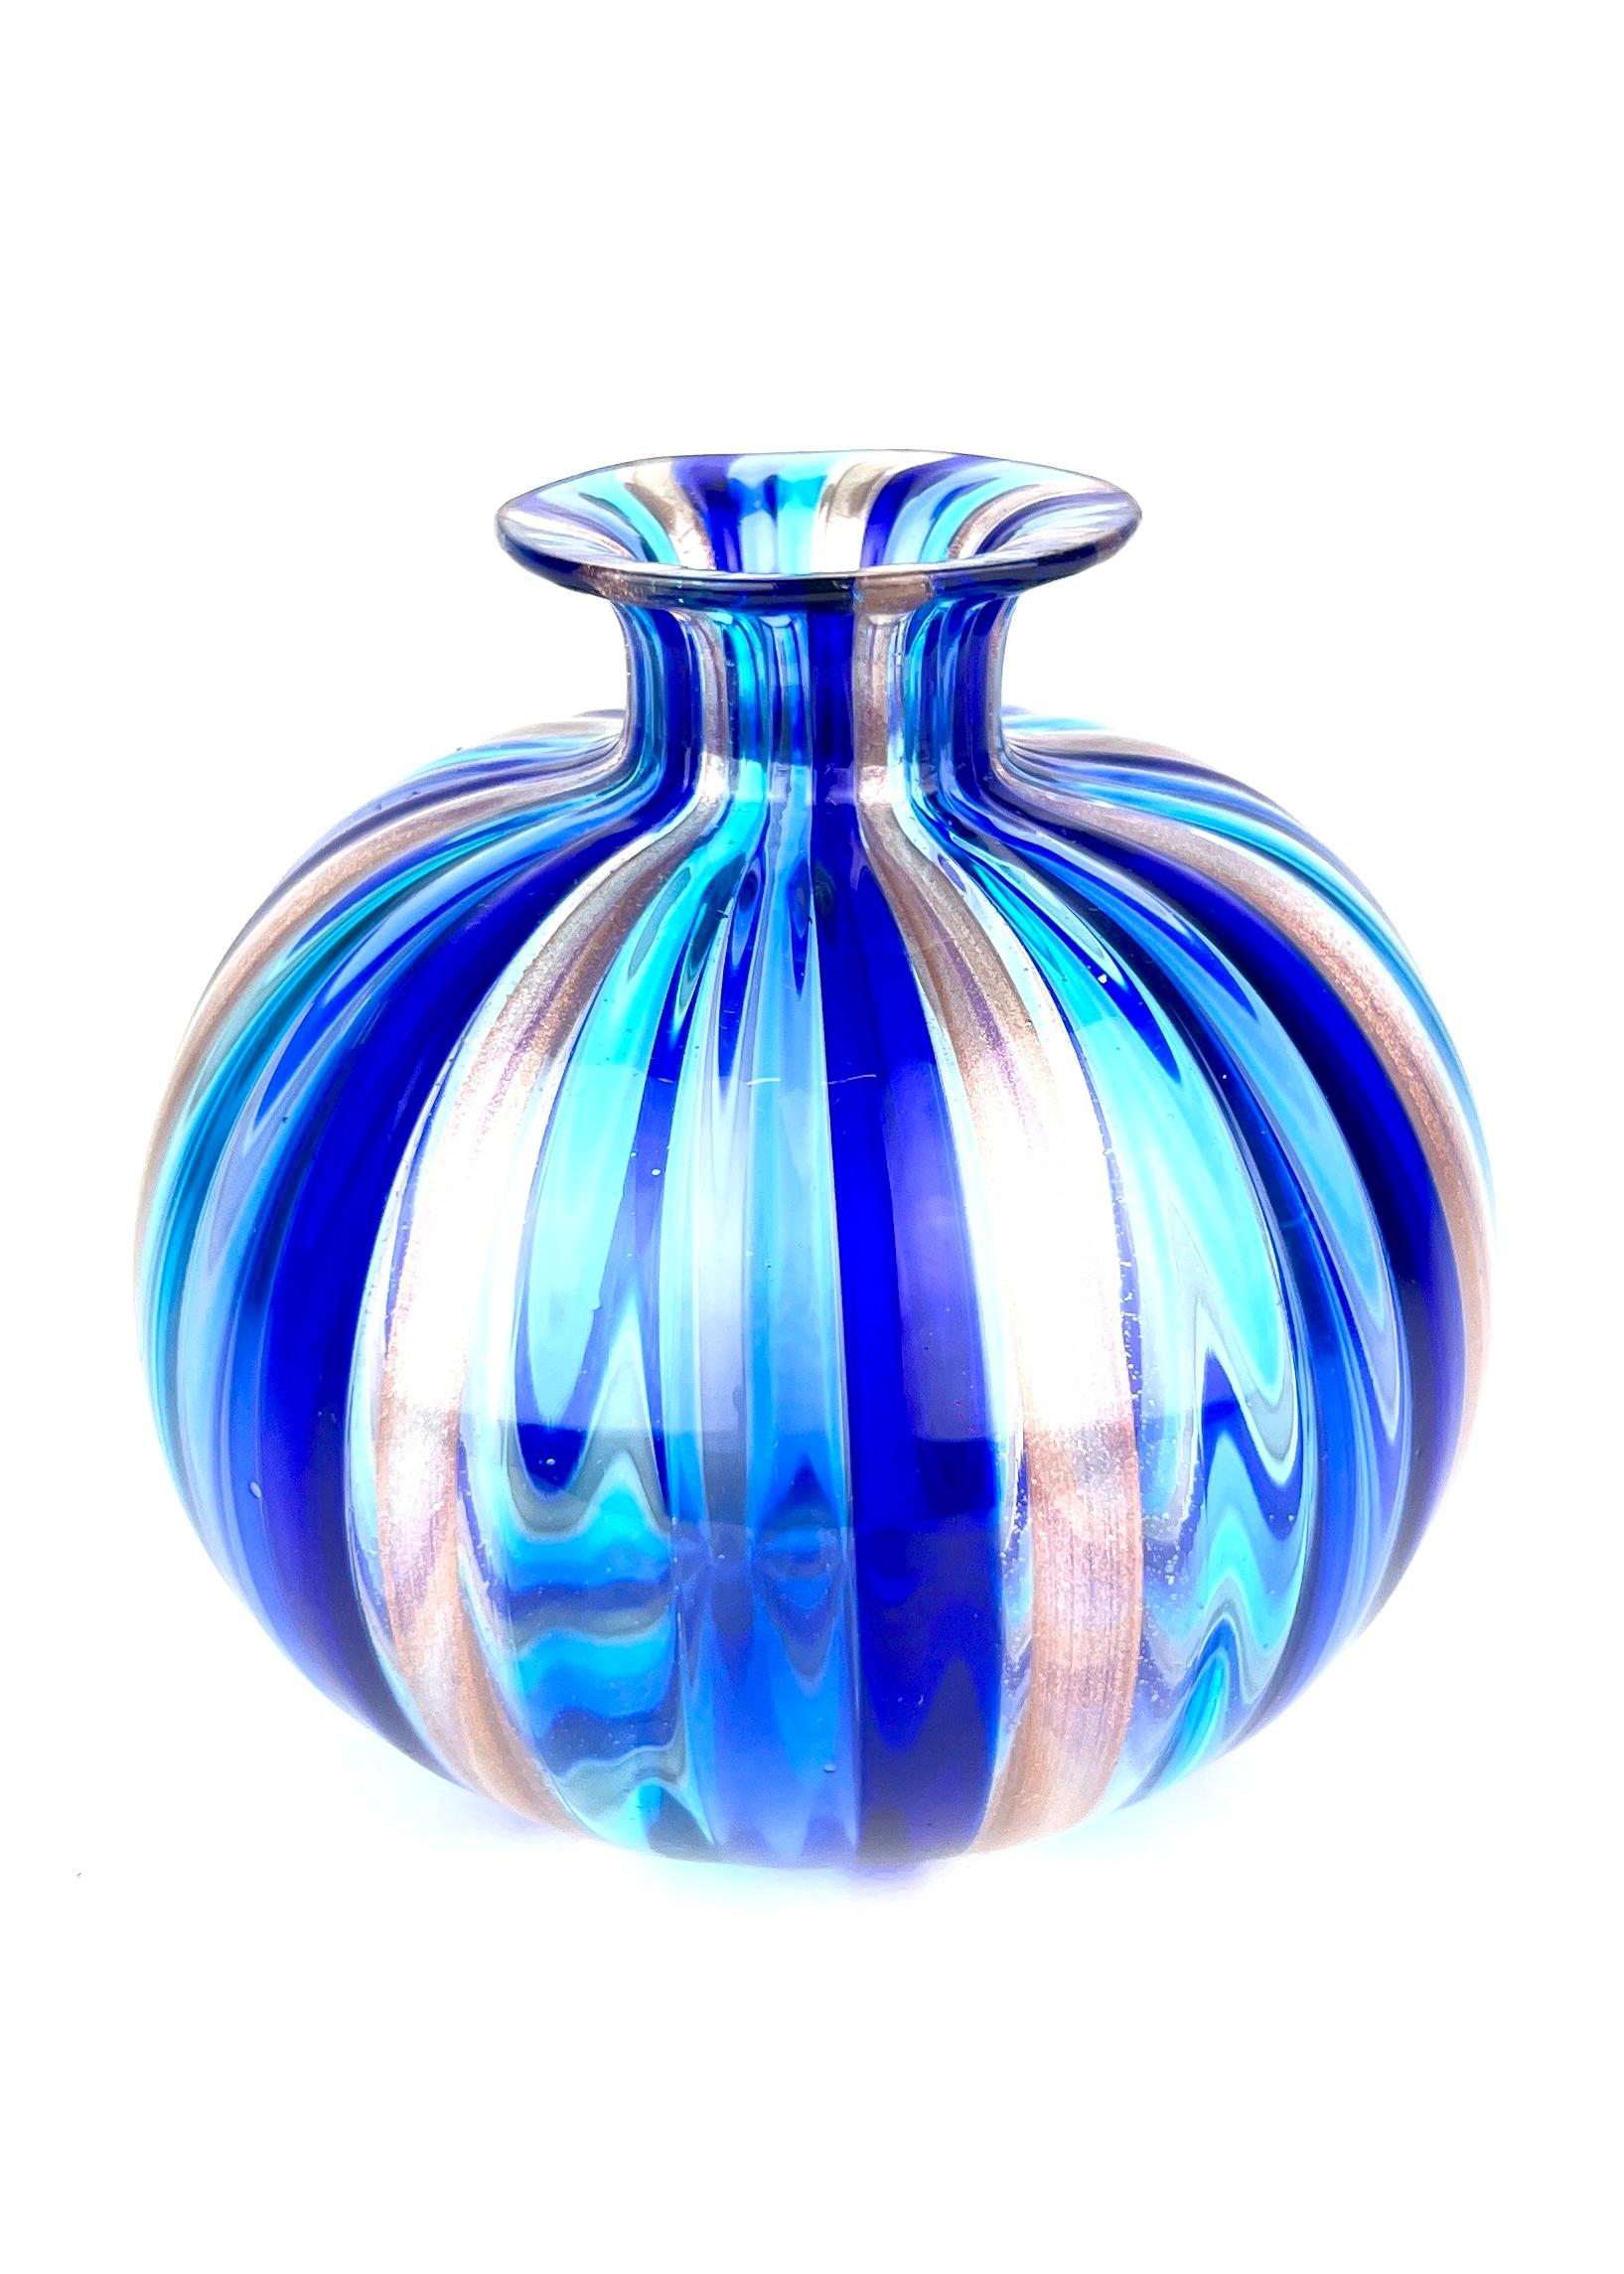 Kanne Drite Collection – Blue Murano Glass Vases
The Kanne are colored Murano glass cylinders which, fused on the vase, form this wonderful work.
Drite is said when the kanne are positioned in such a way as to be vertical.
Murano blown glass vases